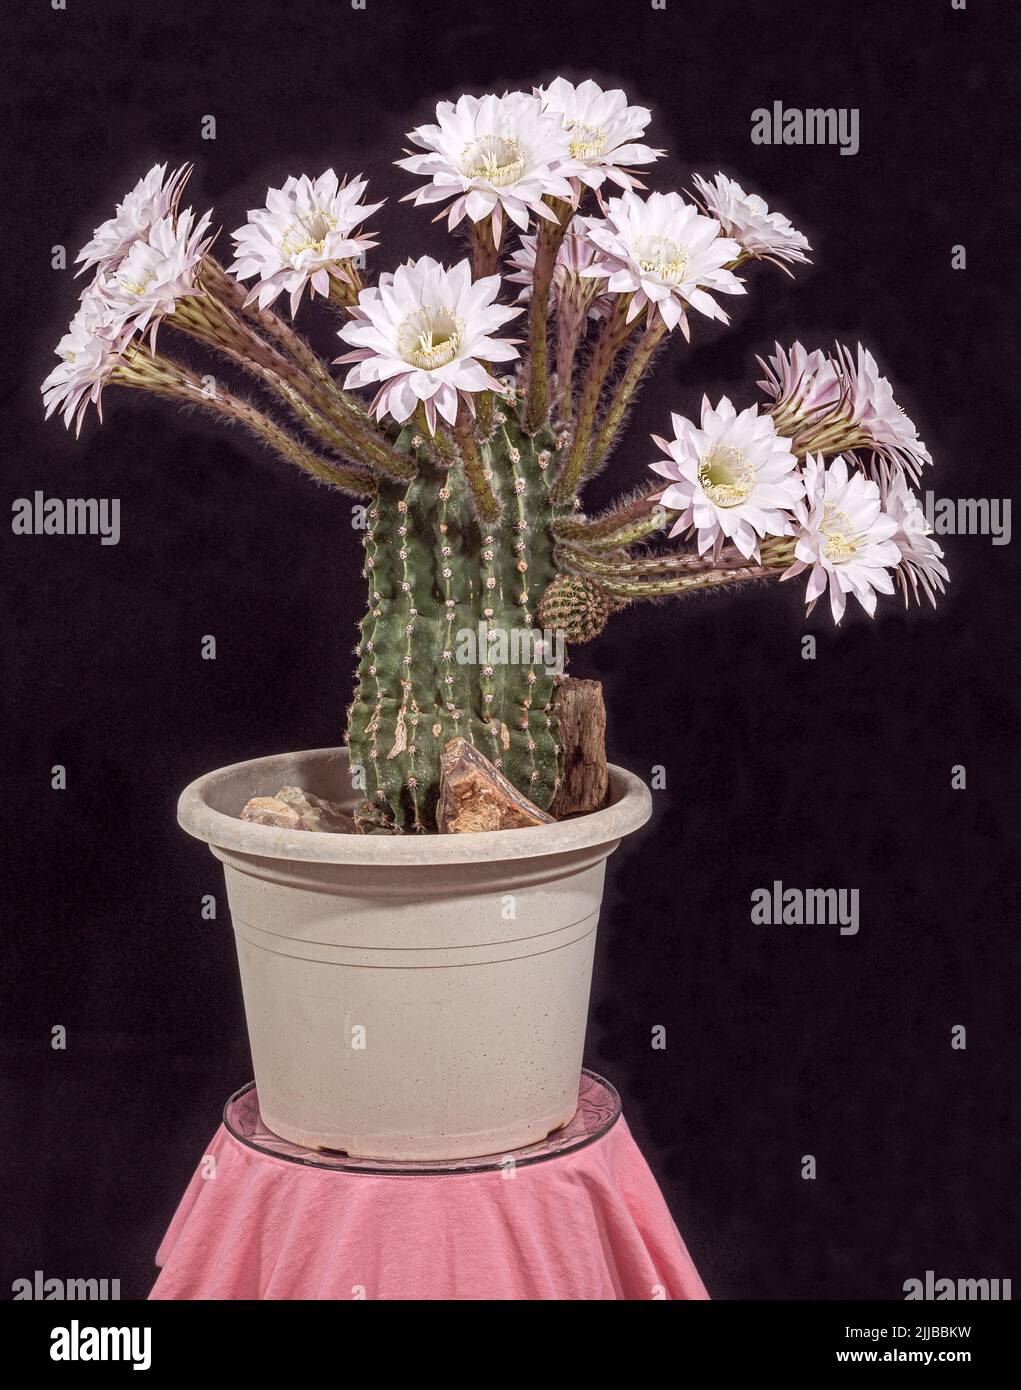 Echinopsis eryiesii easter lily cactus with nineteen white and pink flowers is a living bouquet on a black background Stock Photo